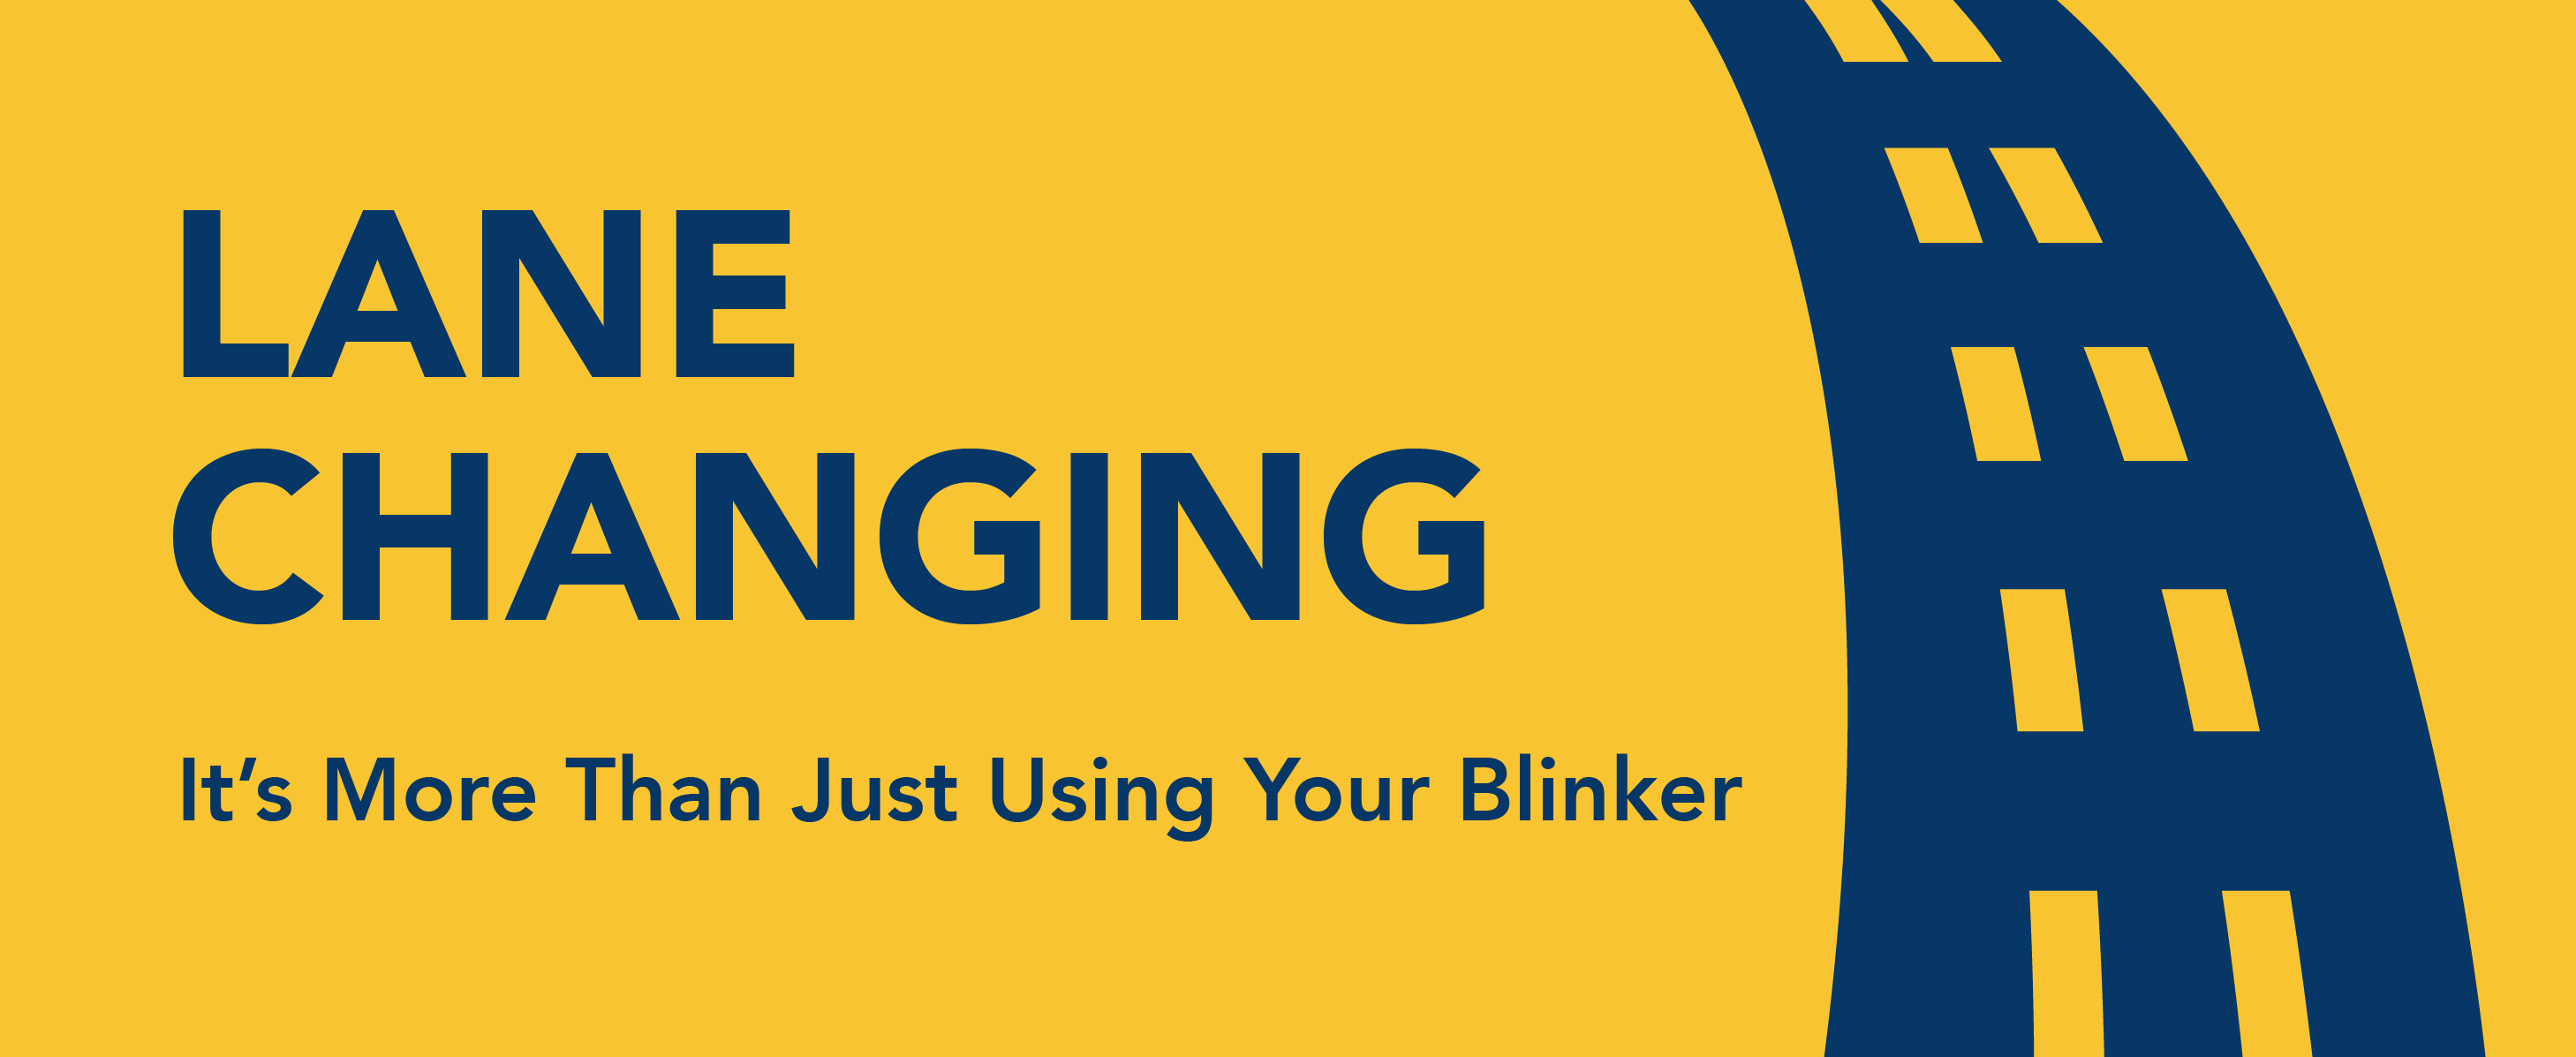 Lane changing: It's more than Just Using Your Blinker